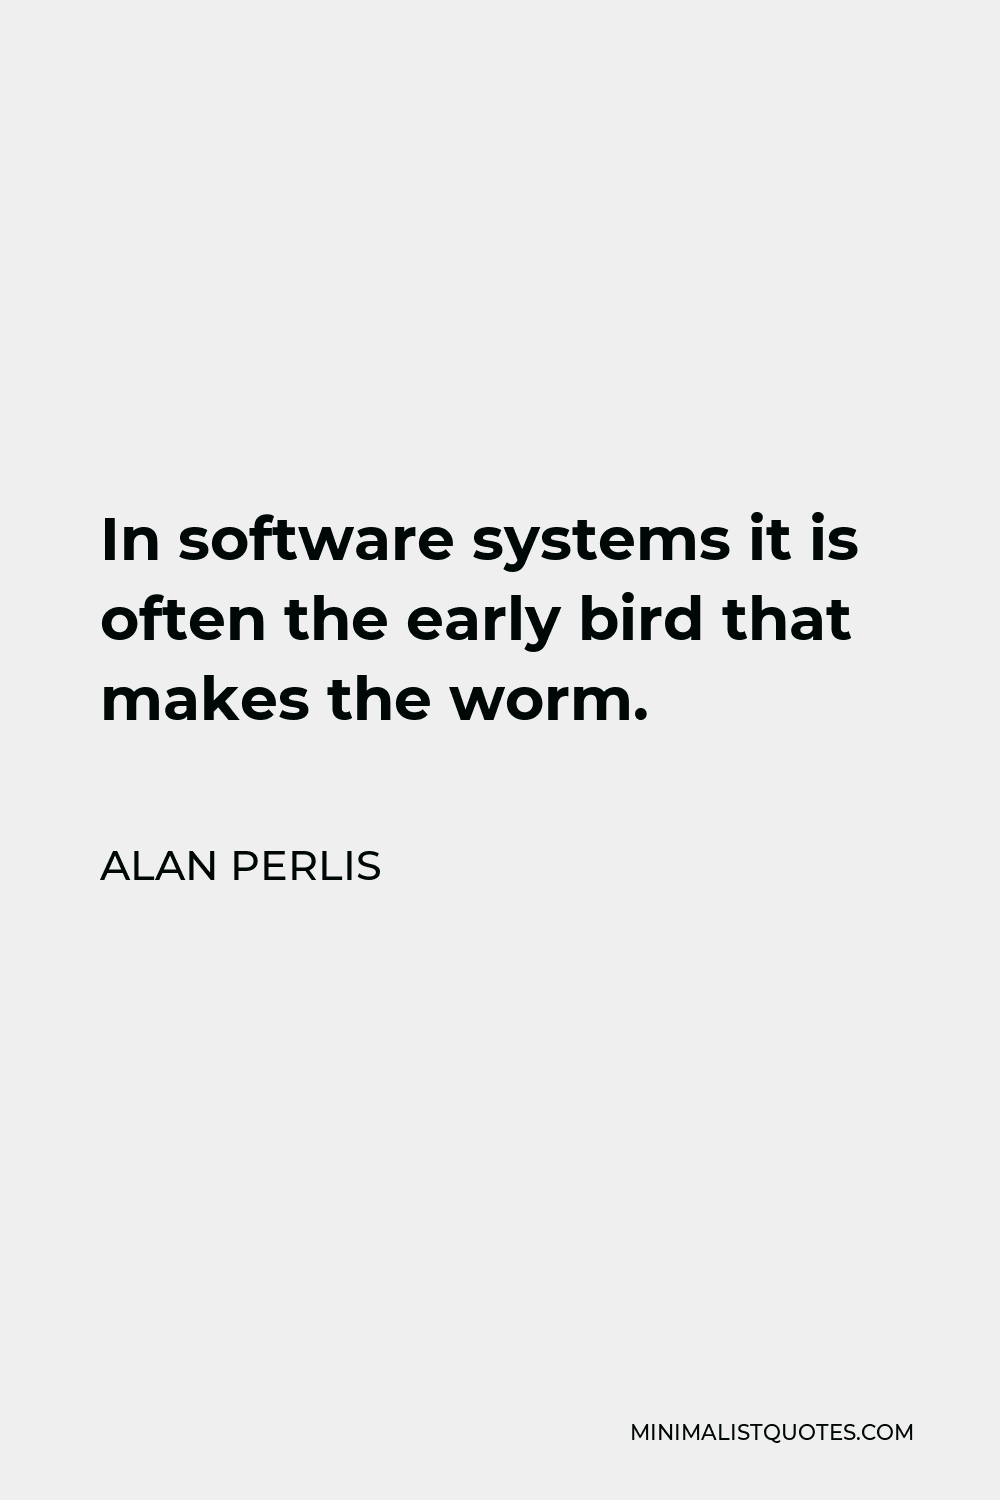 Alan Perlis Quote - In software systems it is often the early bird that makes the worm.